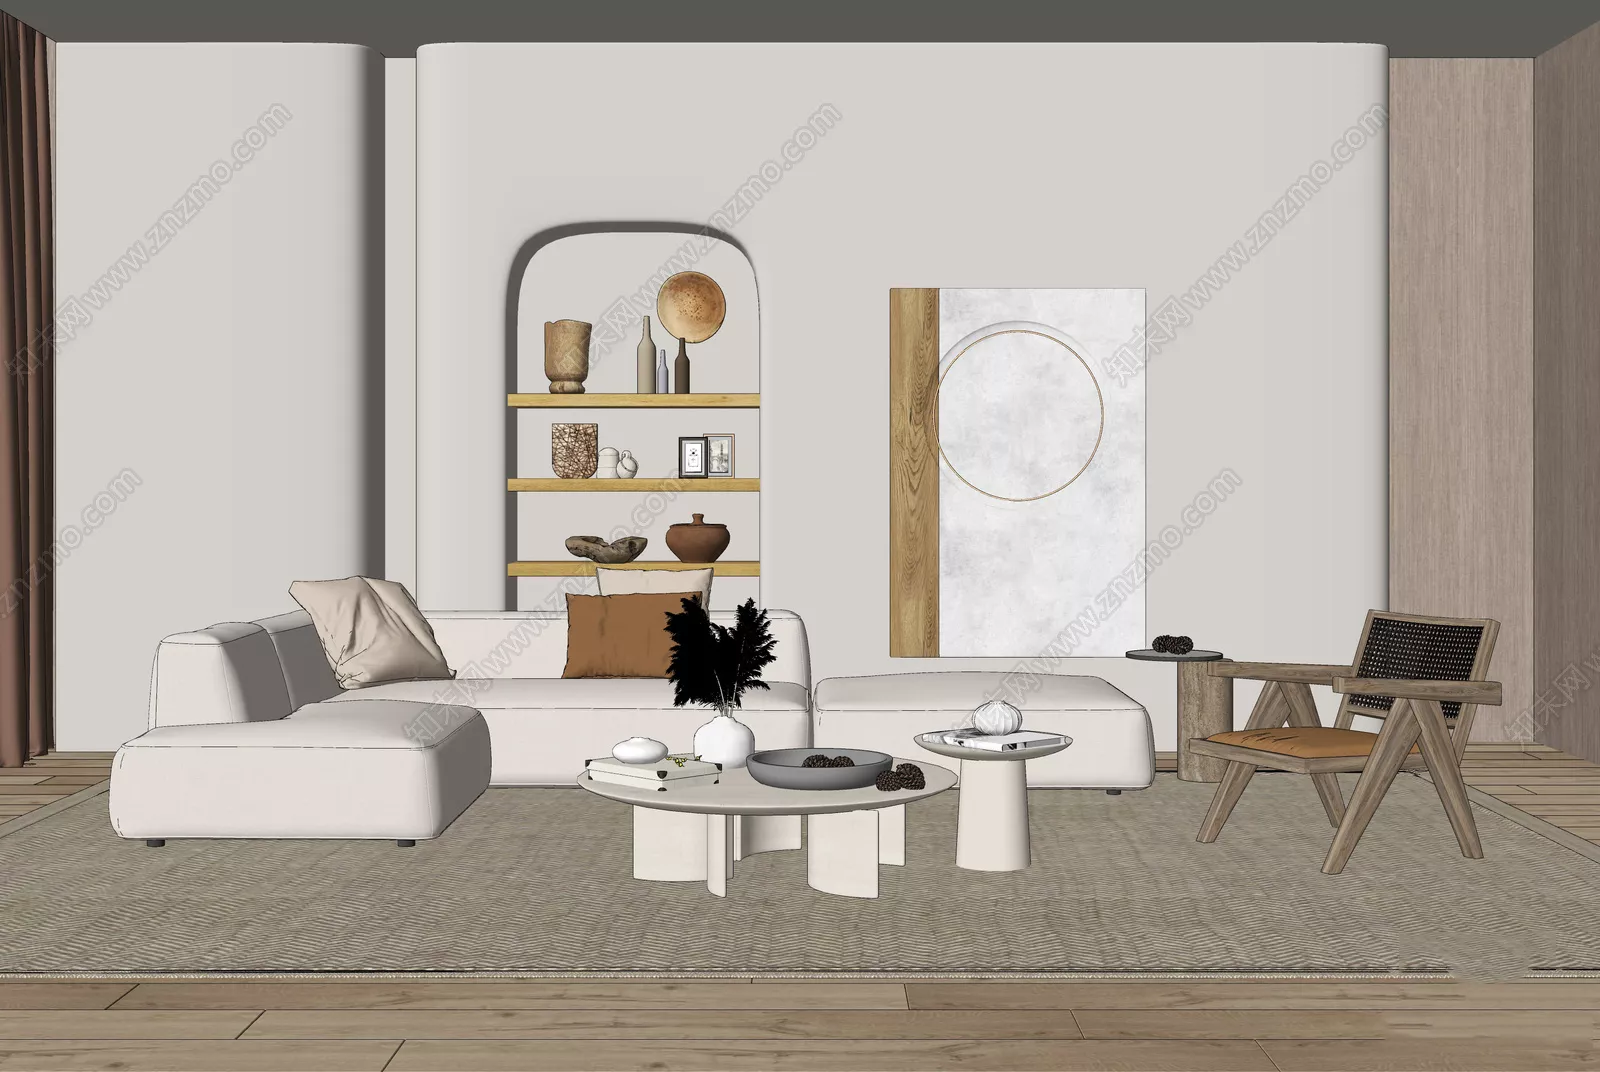 WABI SABI INTERIOR COLLECTION - SKETCHUP 3D SCENE - VRAY OR ENSCAPE - ID17848